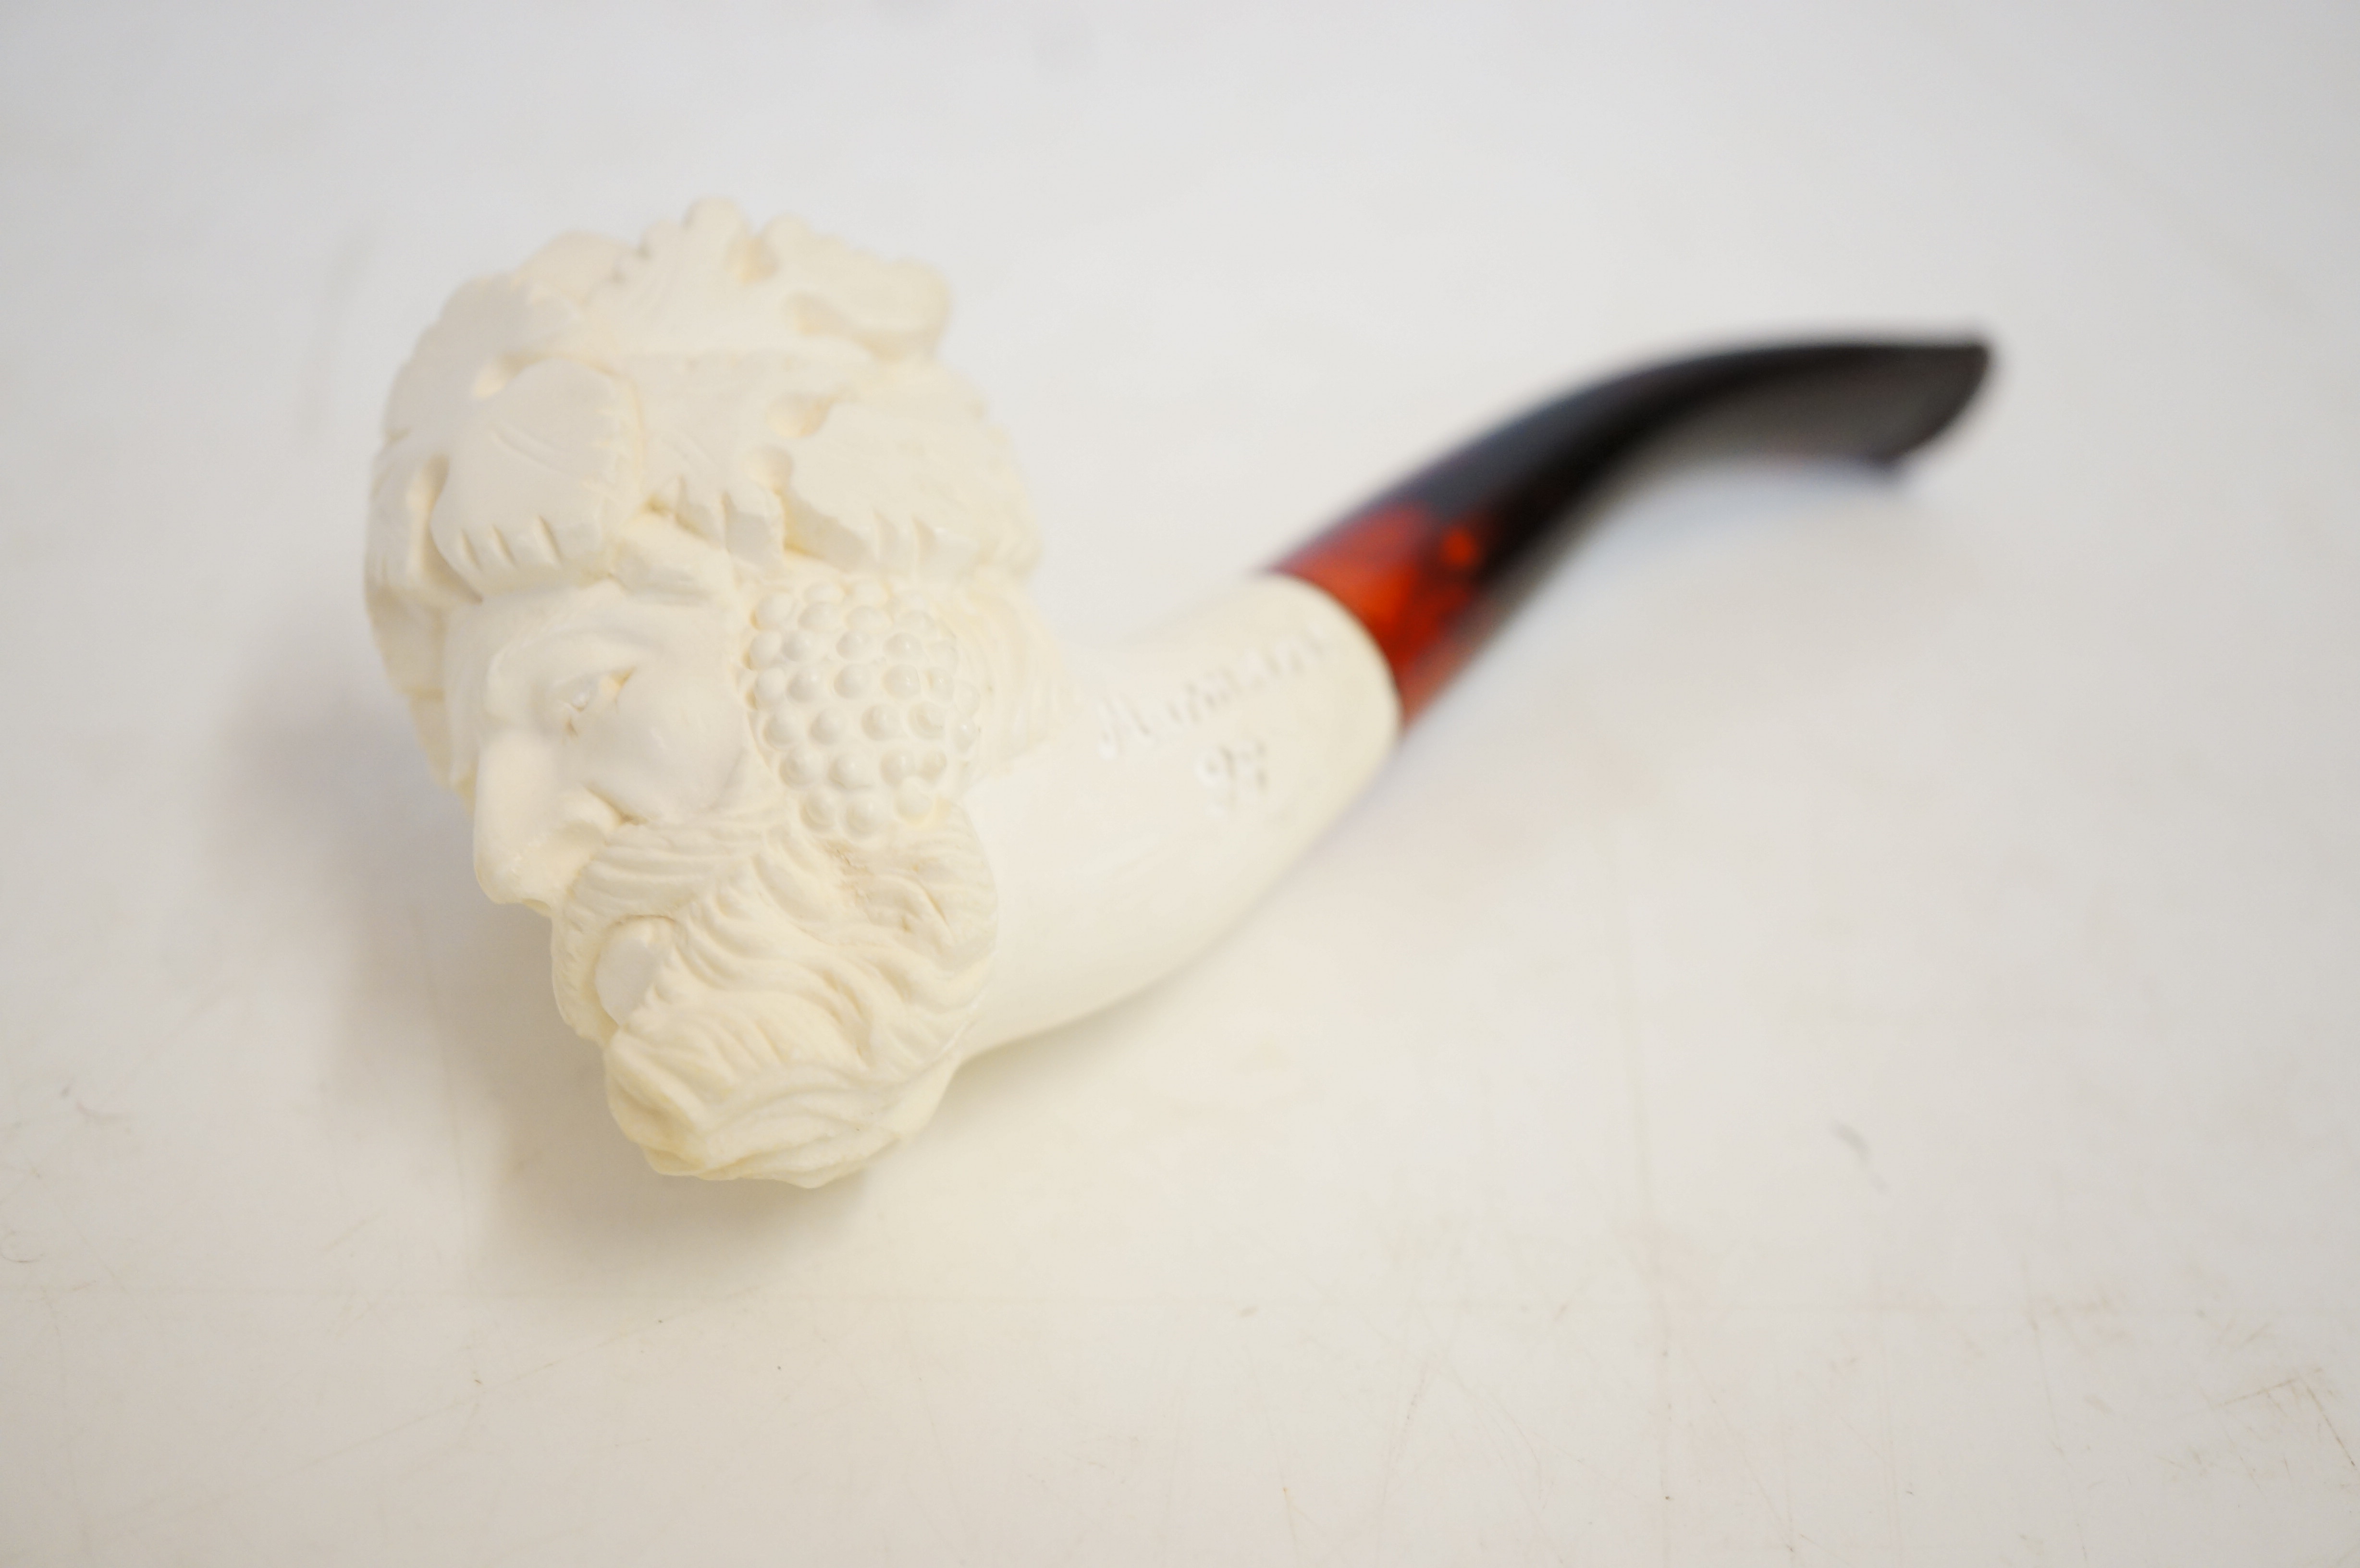 Carved Baccus smokers pipe